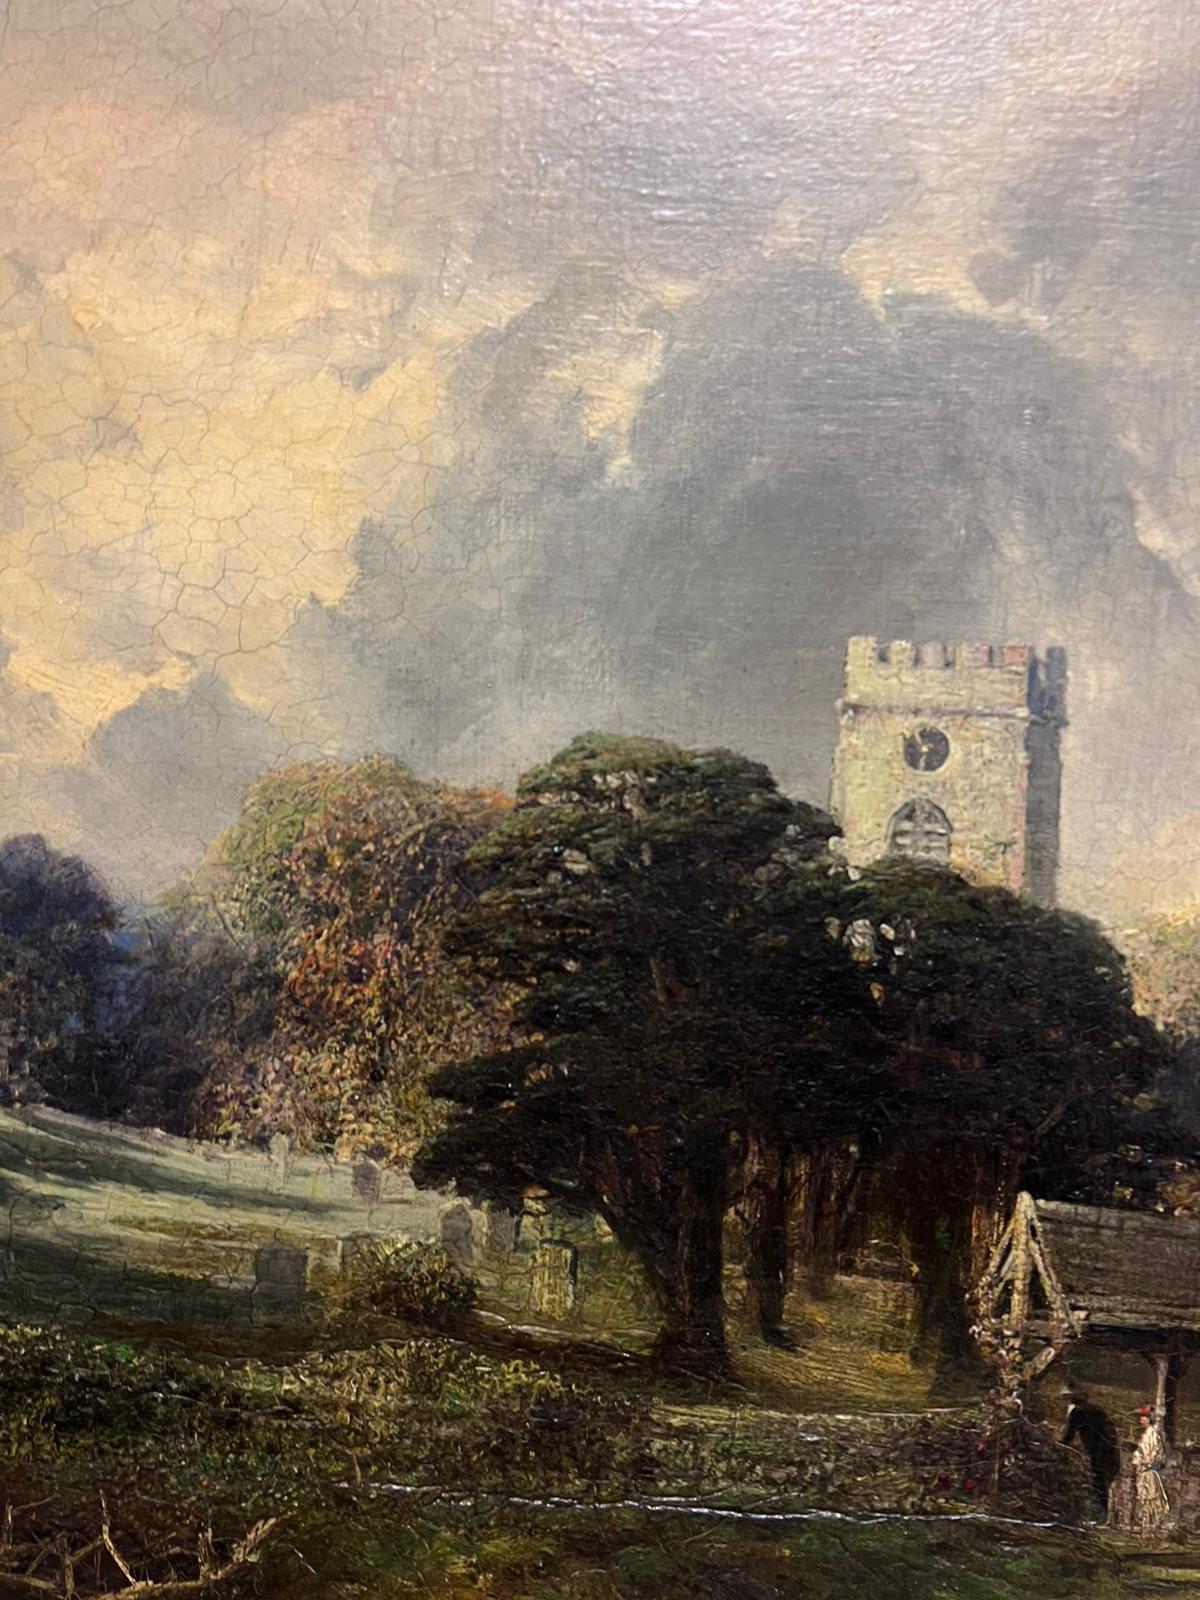 The English Country Churchyard
by James Rudd (English 1821-1906)
signed & dated 1889
oil on canvas, framed
framed: 28.5 x 41 inches
painting: 24 x 36 inches
provenance: private collection, England
condition: very good and sound condition